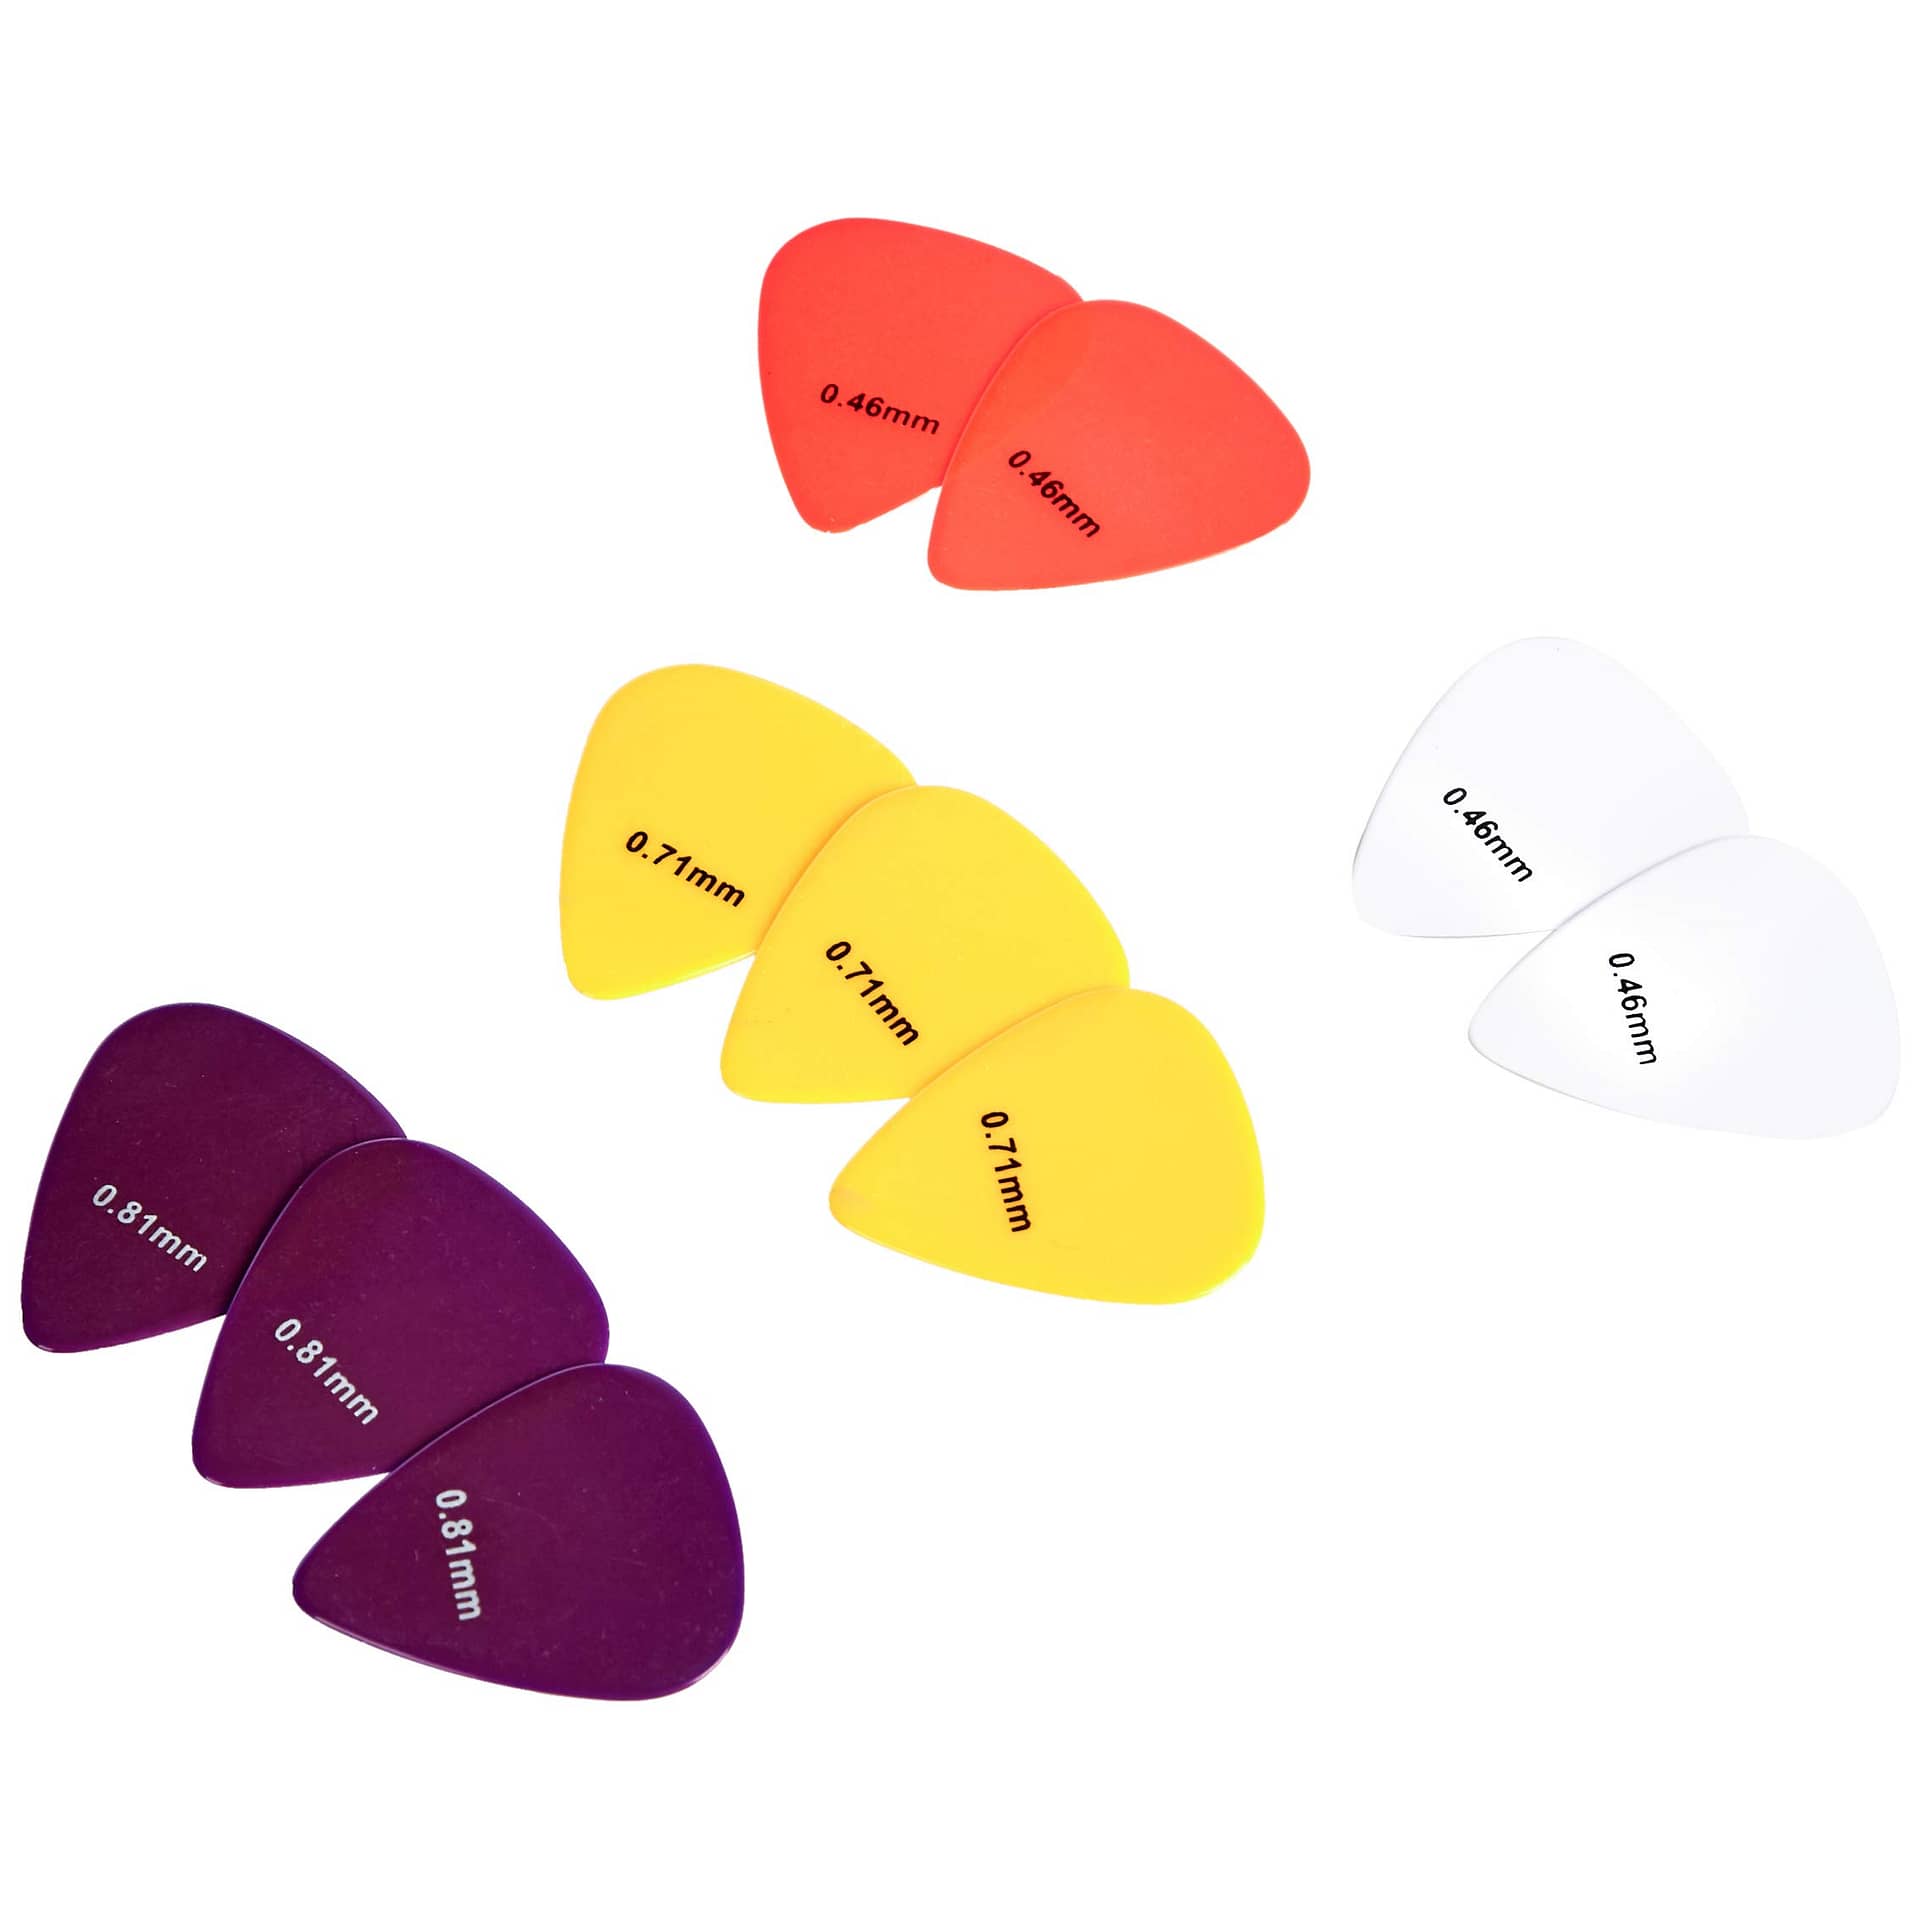 AmazonBasics Guitar Picks, Solid Colors, Celluloid, 10-Pack 5